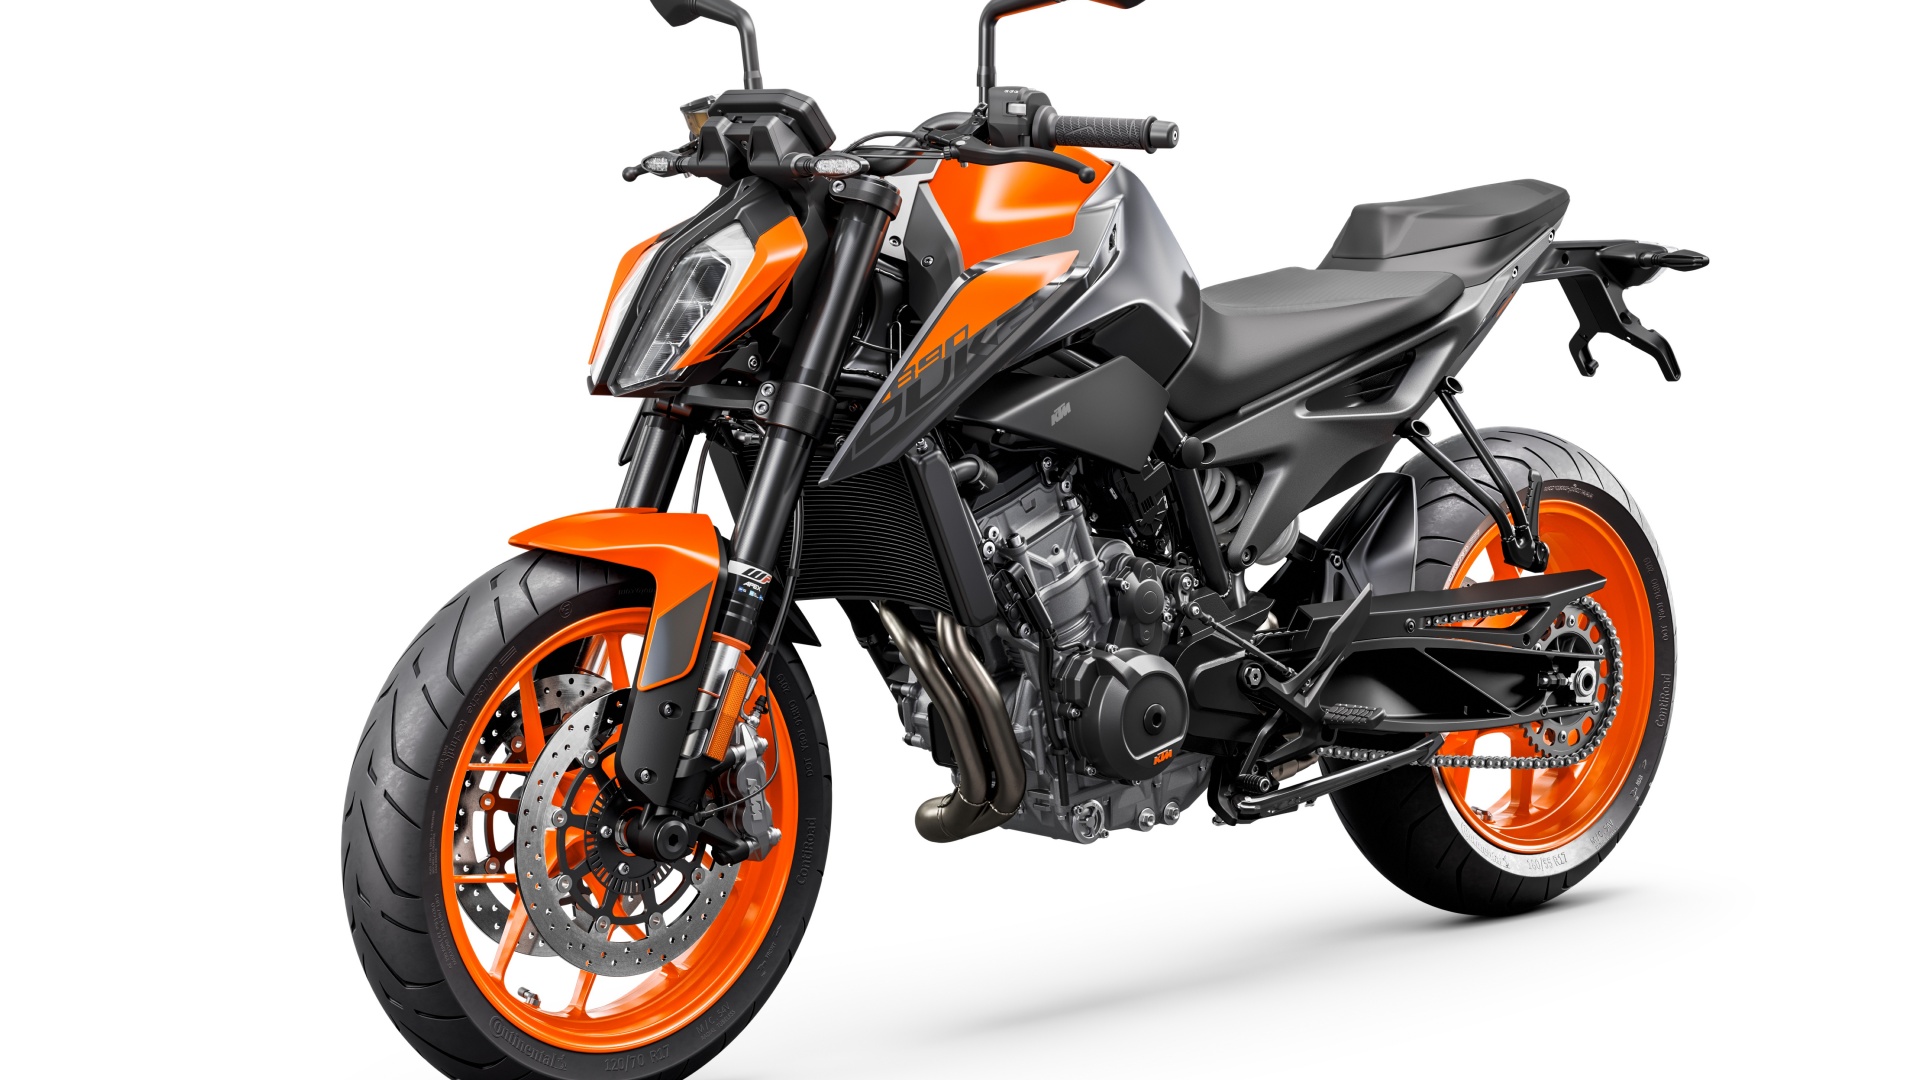 Download KTM 125 Duke Wallpapers Free for Android - KTM 125 Duke Wallpapers  APK Download - STEPrimo.com